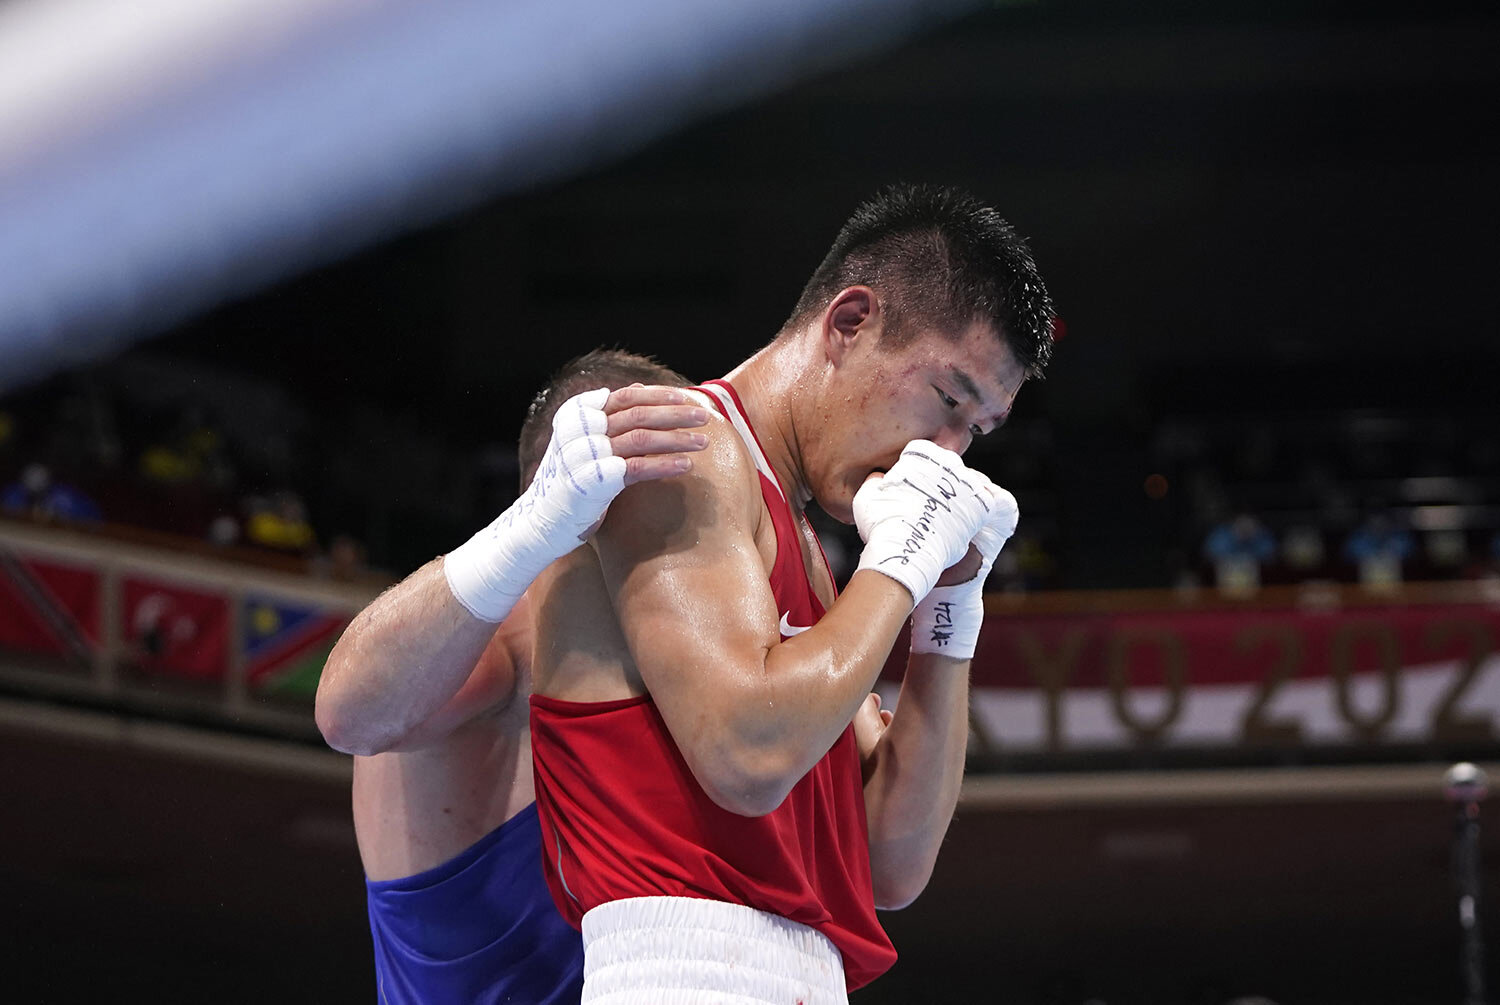  Russian Olympic Committee's Imam Khataev comforts Kazakhstan's Bekzad Nurdauletov after the former won the men's light heavyweight 81-kg preliminaries boxing match at the 2020 Summer Olympics, Wednesday, July 28, 2021, in Tokyo, Japan. (AP Photo/Fra